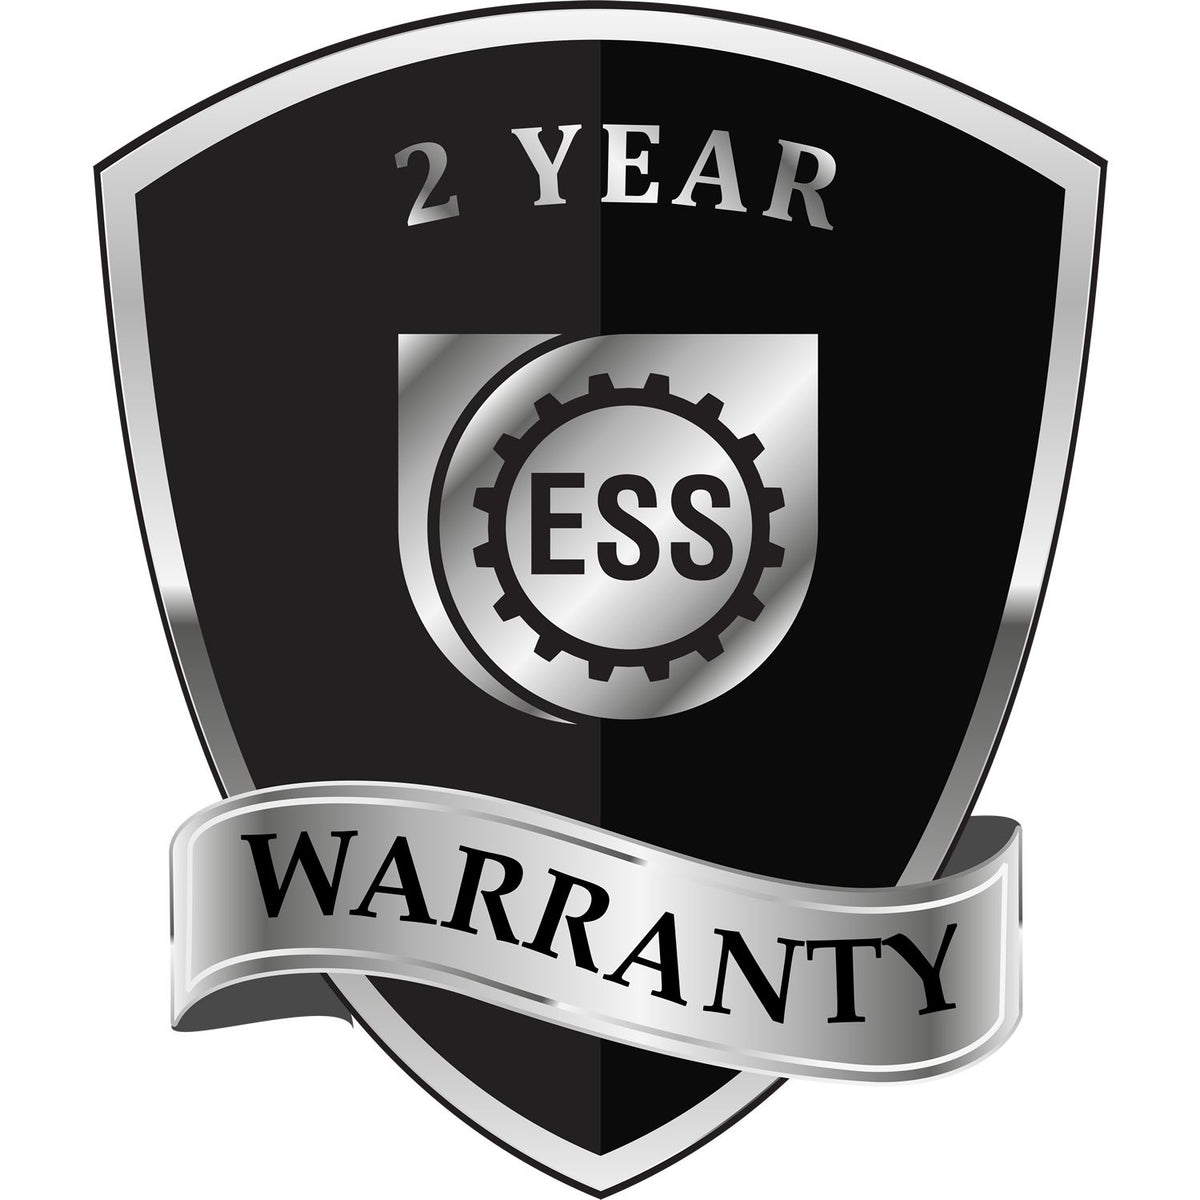 A black and silver badge or emblem showing warranty information for the Heavy Duty Cast Iron Illinois Geologist Seal Embosser